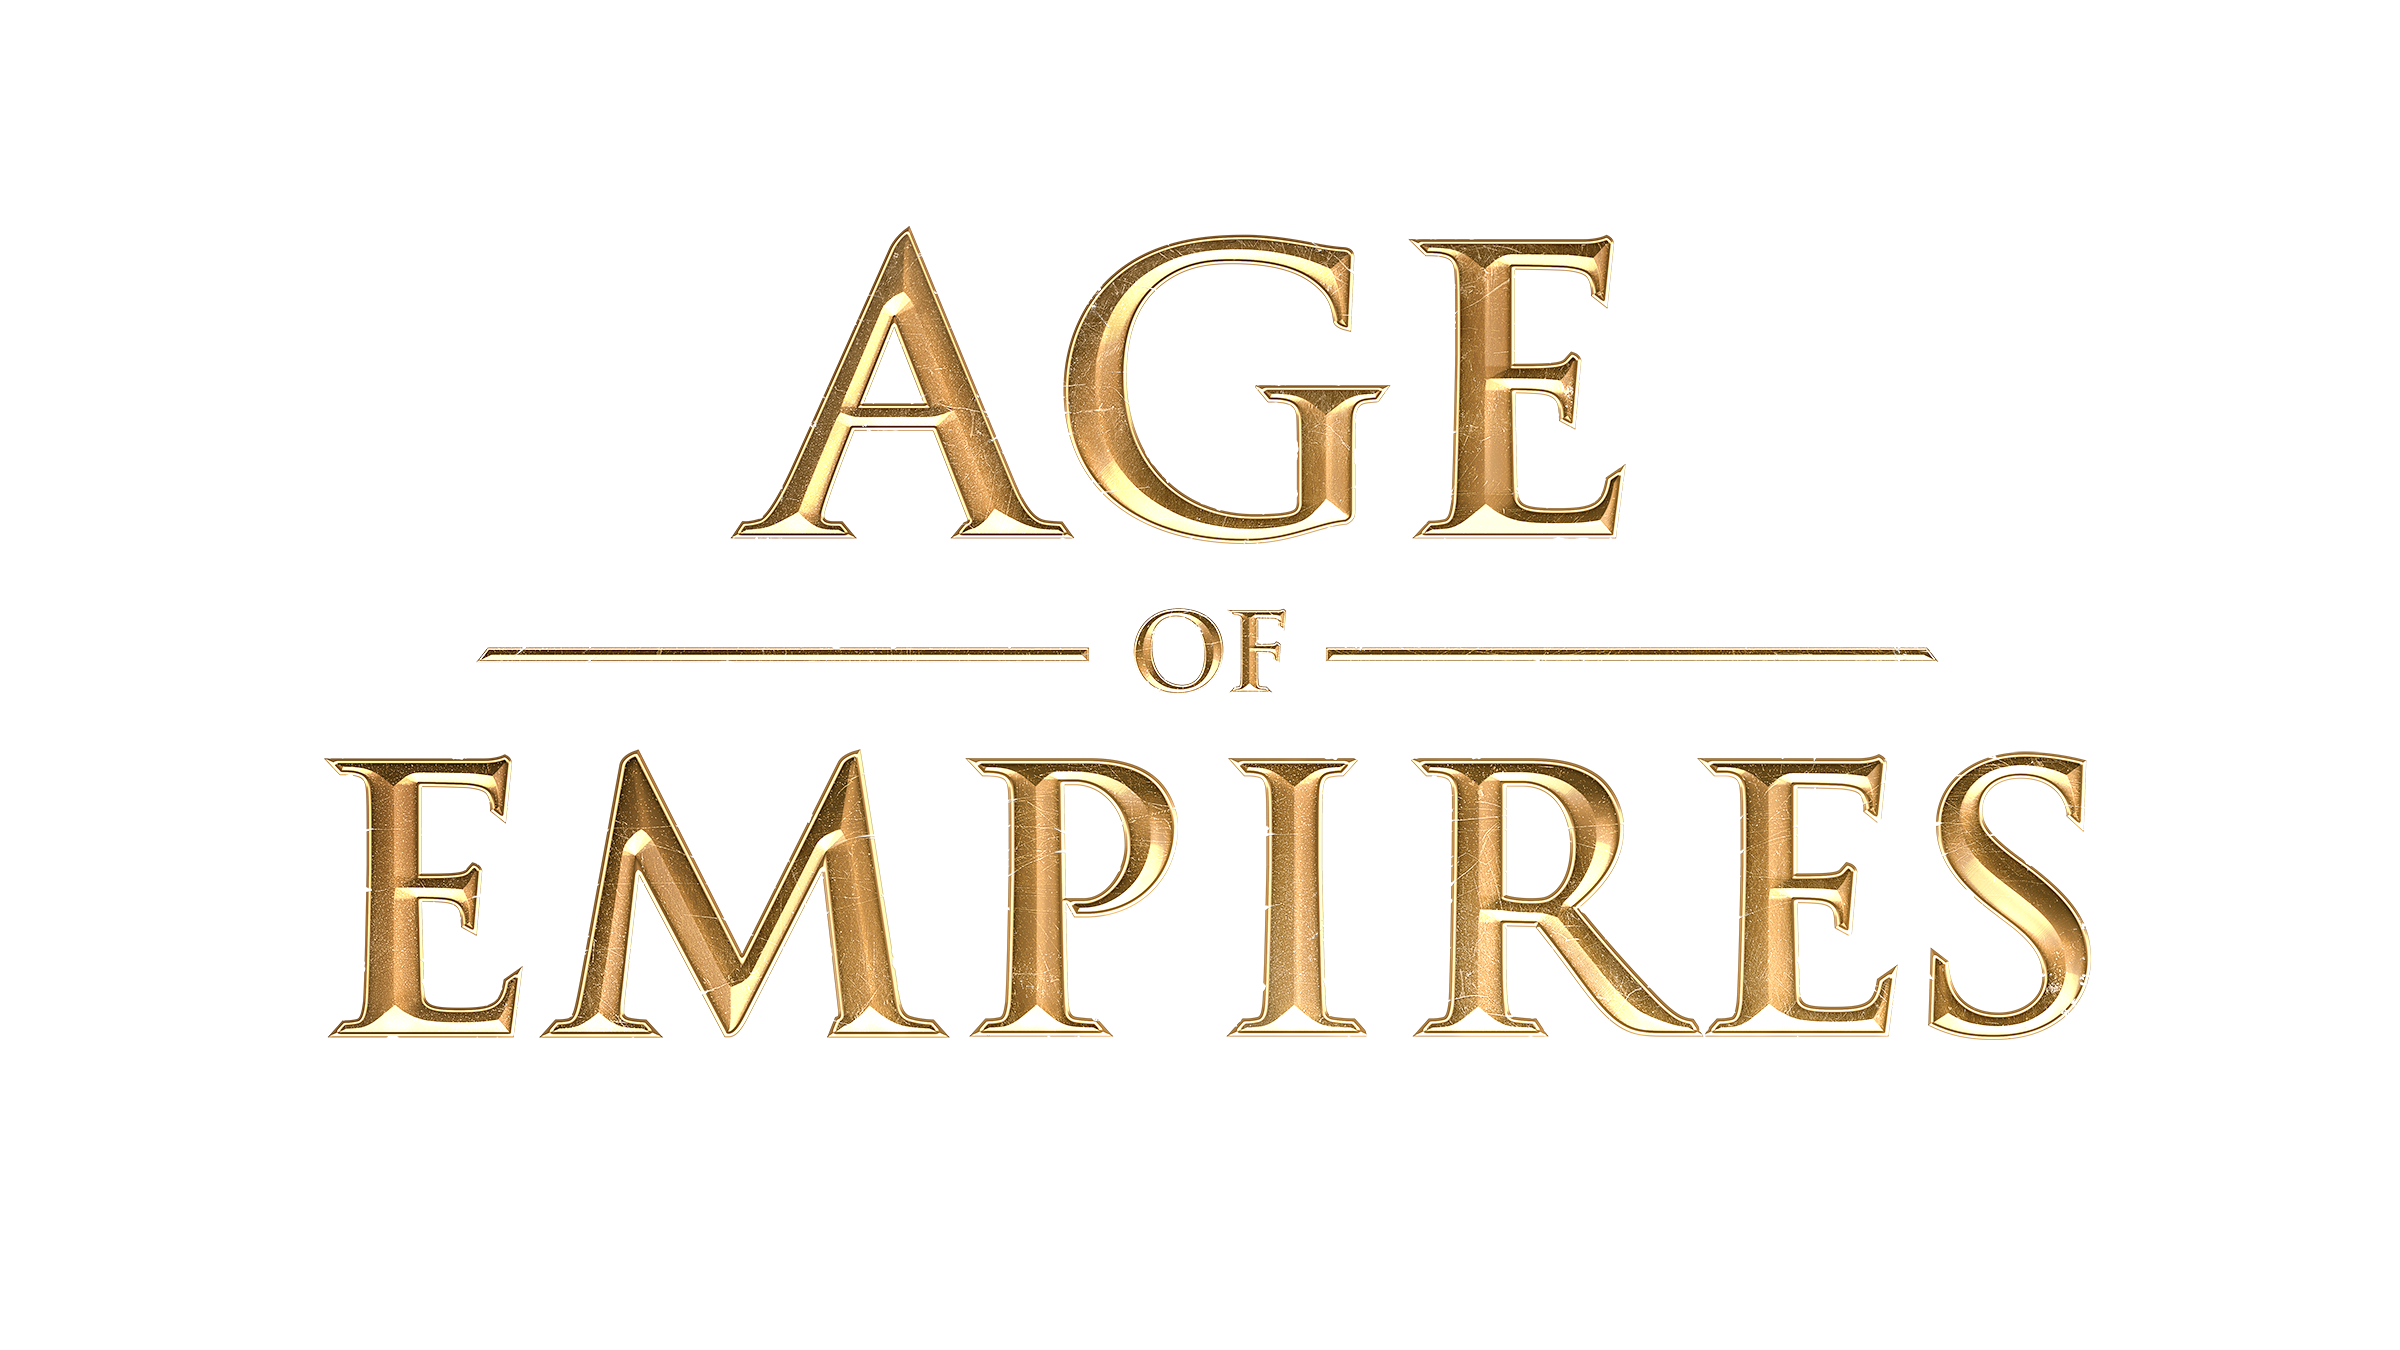 Edition logo. Age of Empires 4. Age of Empires значок. Age of Empires 4 иконка. Age of Empires 4 обложка.